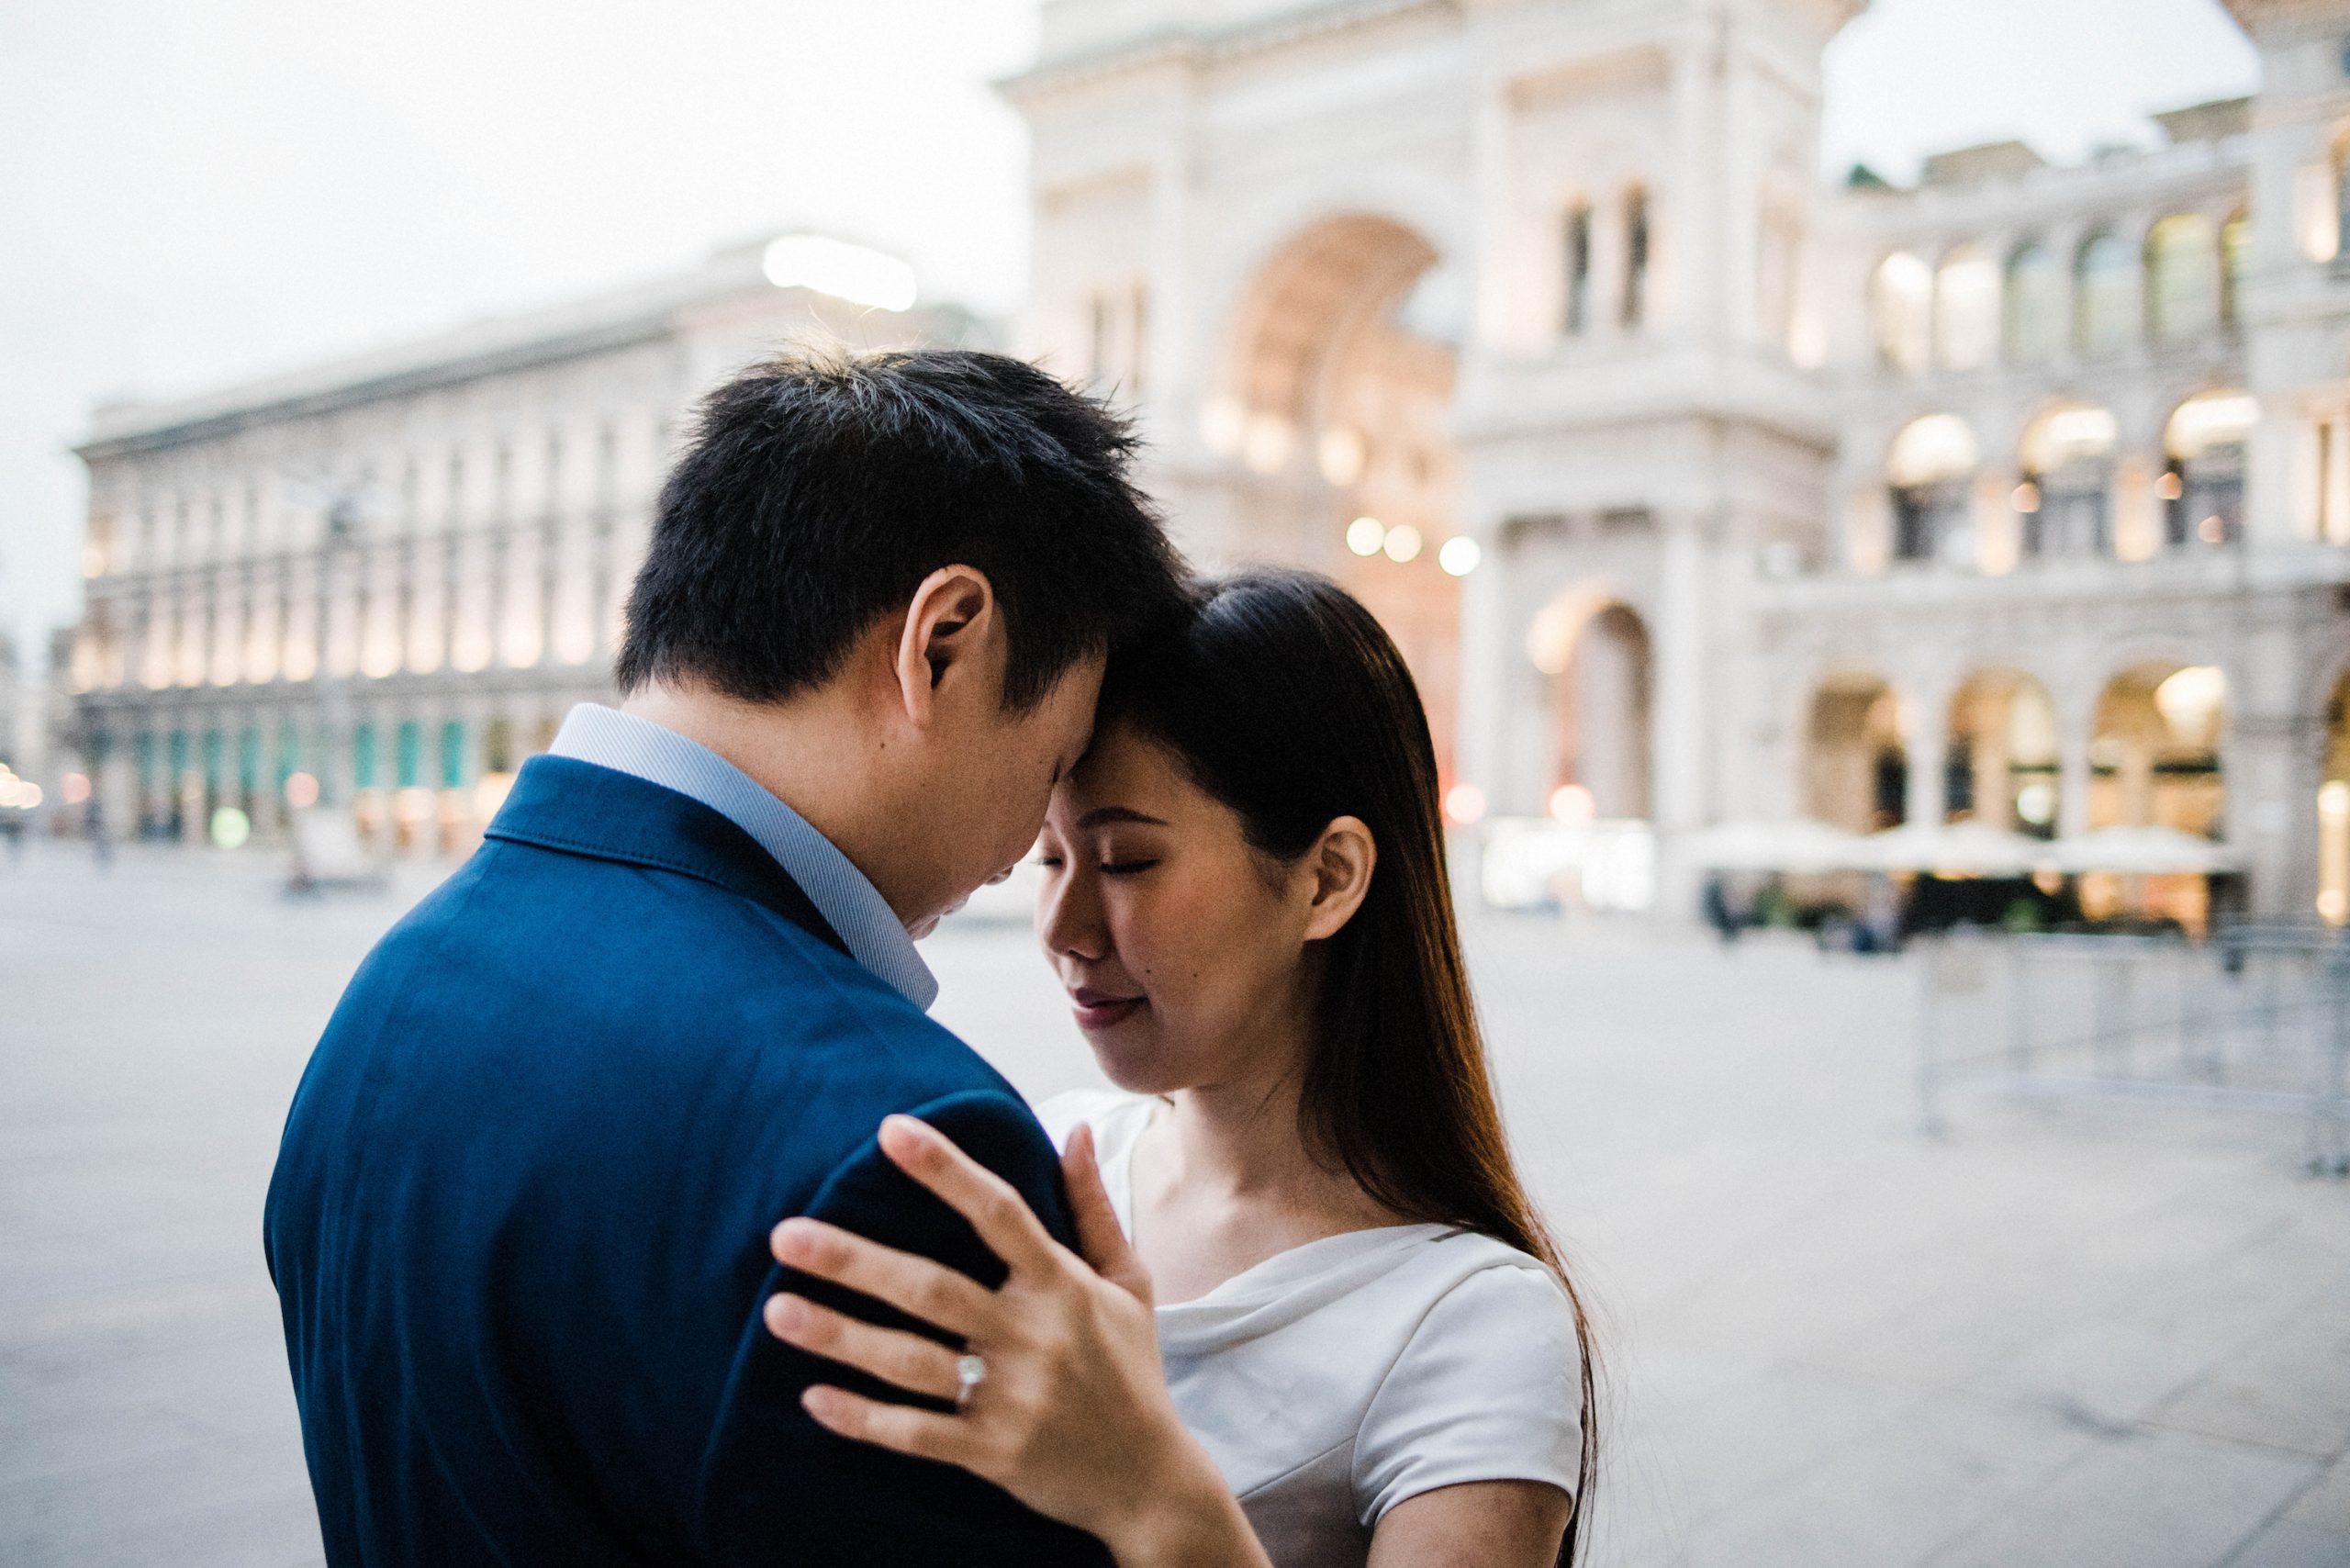 Destination Wedding Photography of a couple standing close together with their eyes closed in the Piazza del Duomo in Milan, Italy.